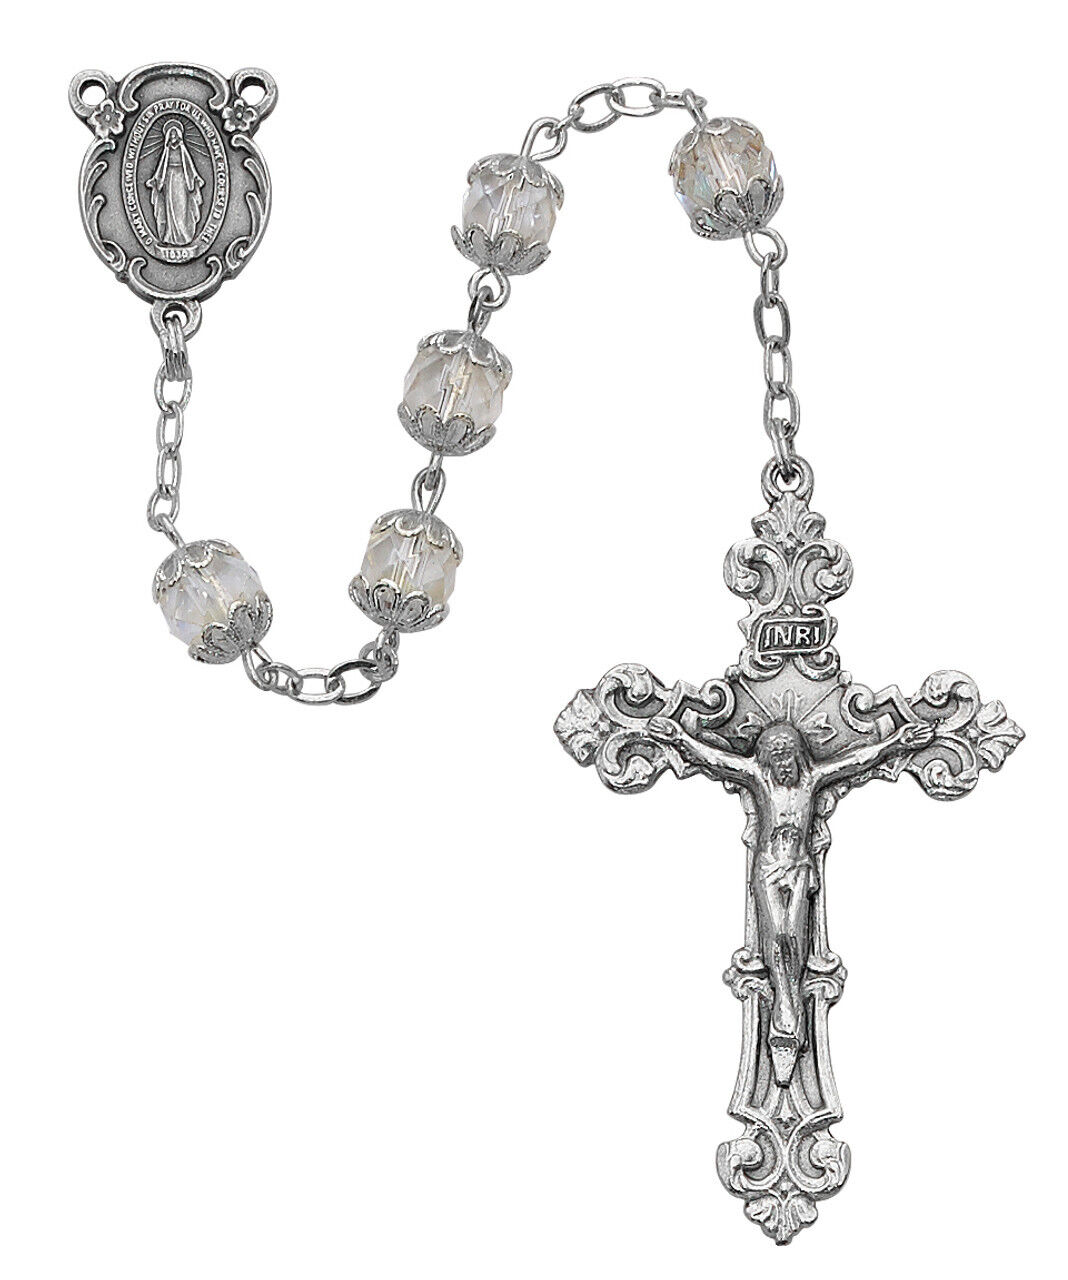 Crystal Aurora Borealis Capped Bead Rosary Silver OX Center And Crucifix 7mm